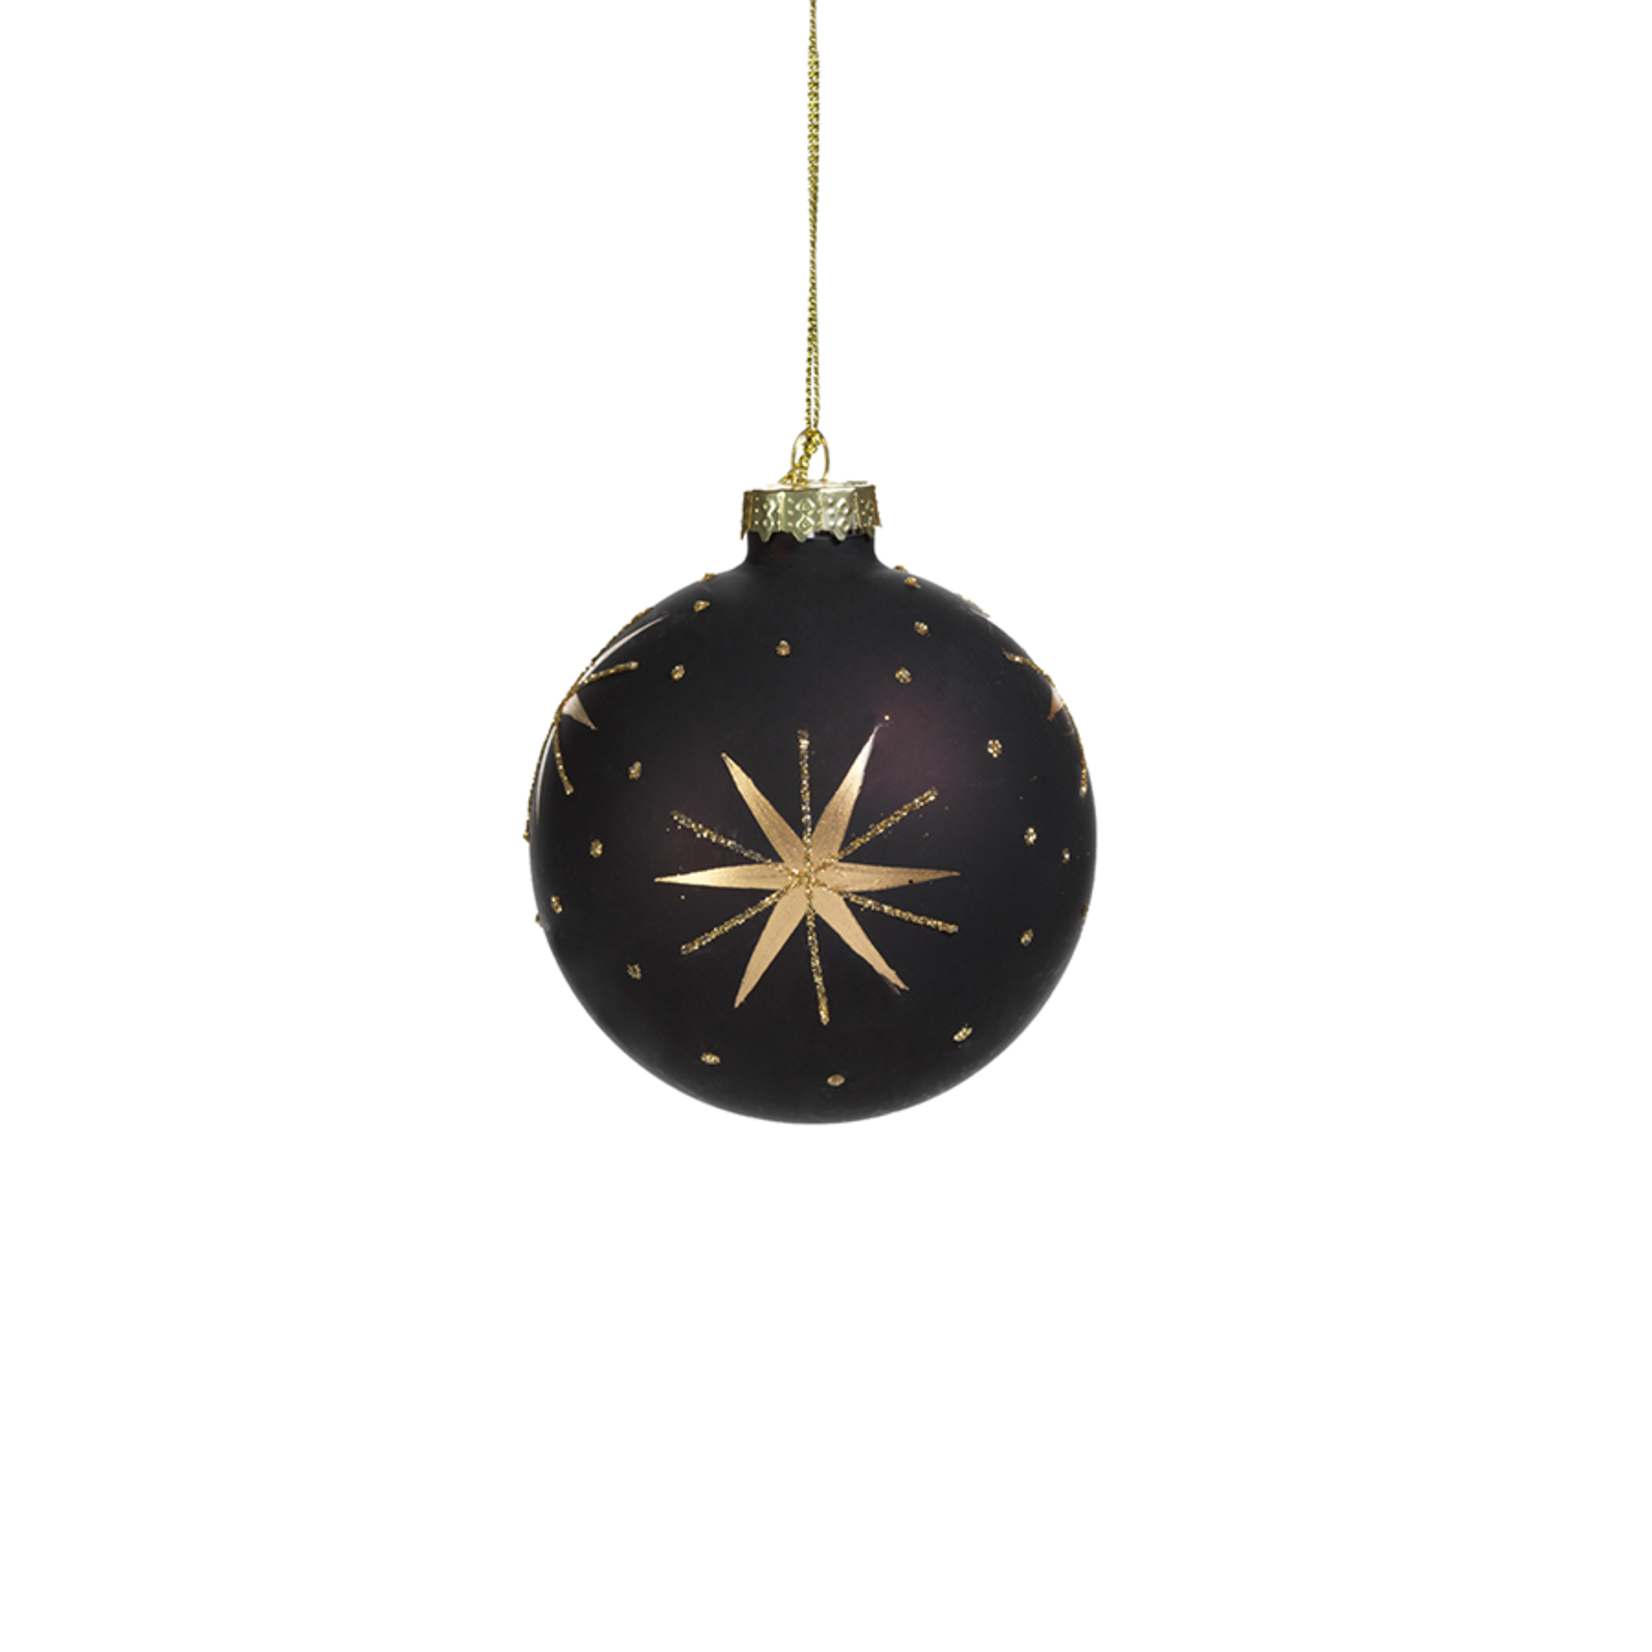 Zodax Gold and Black Star Ornament 3"